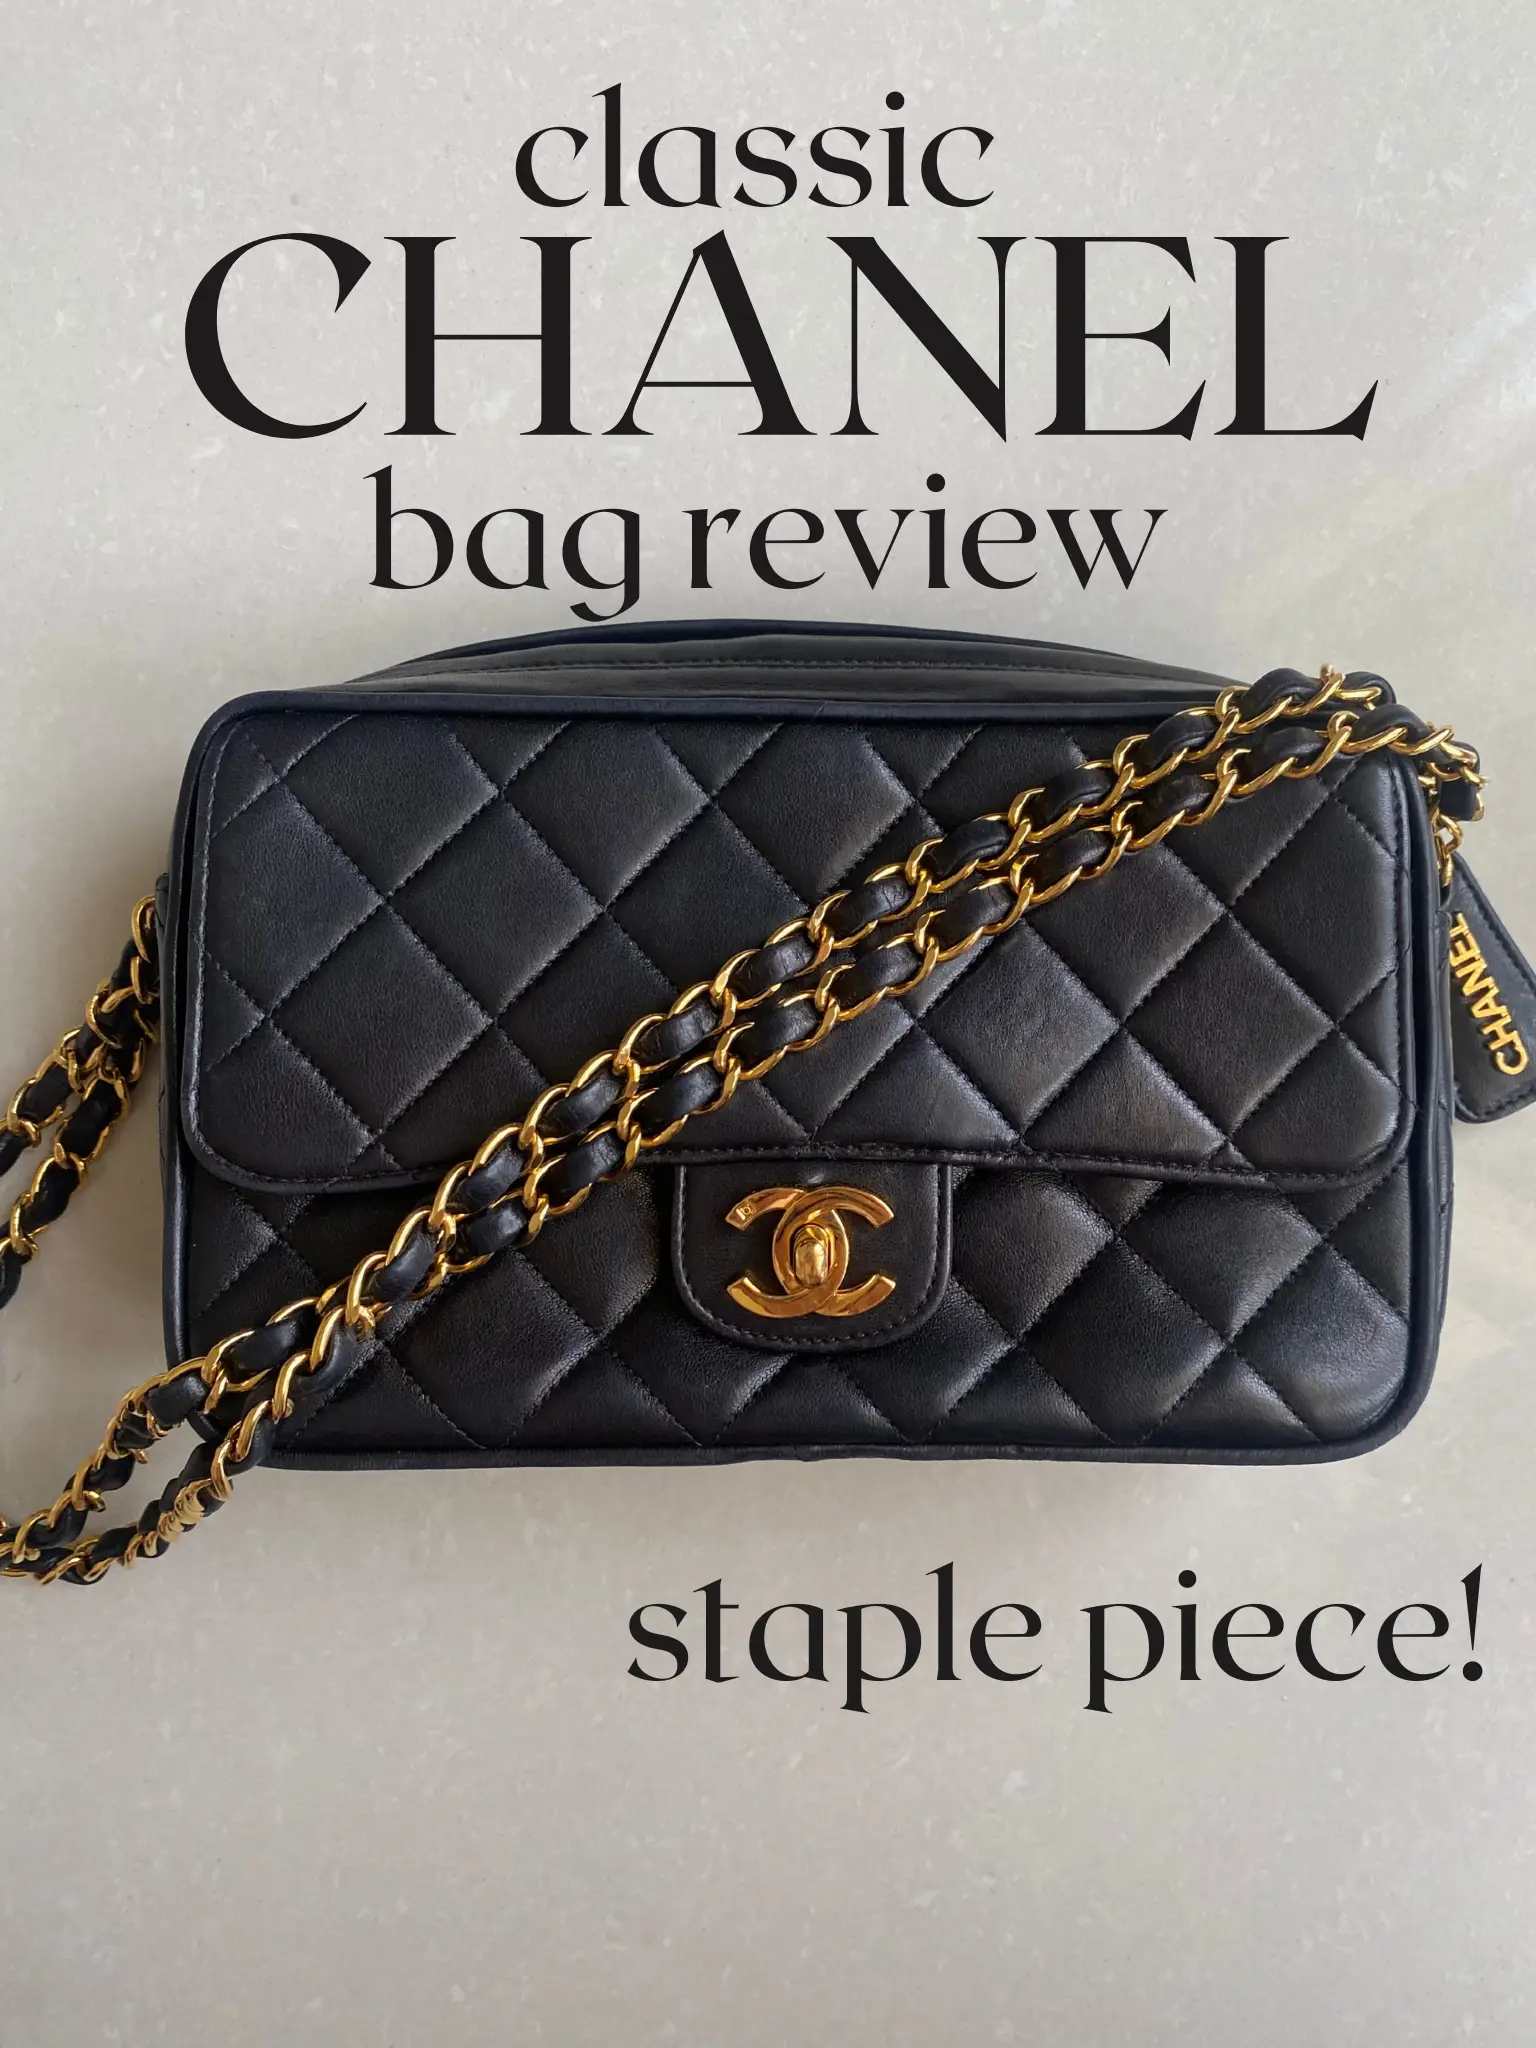 Unbox the most wanted Chanel bag of this season. The Chanel Coco first